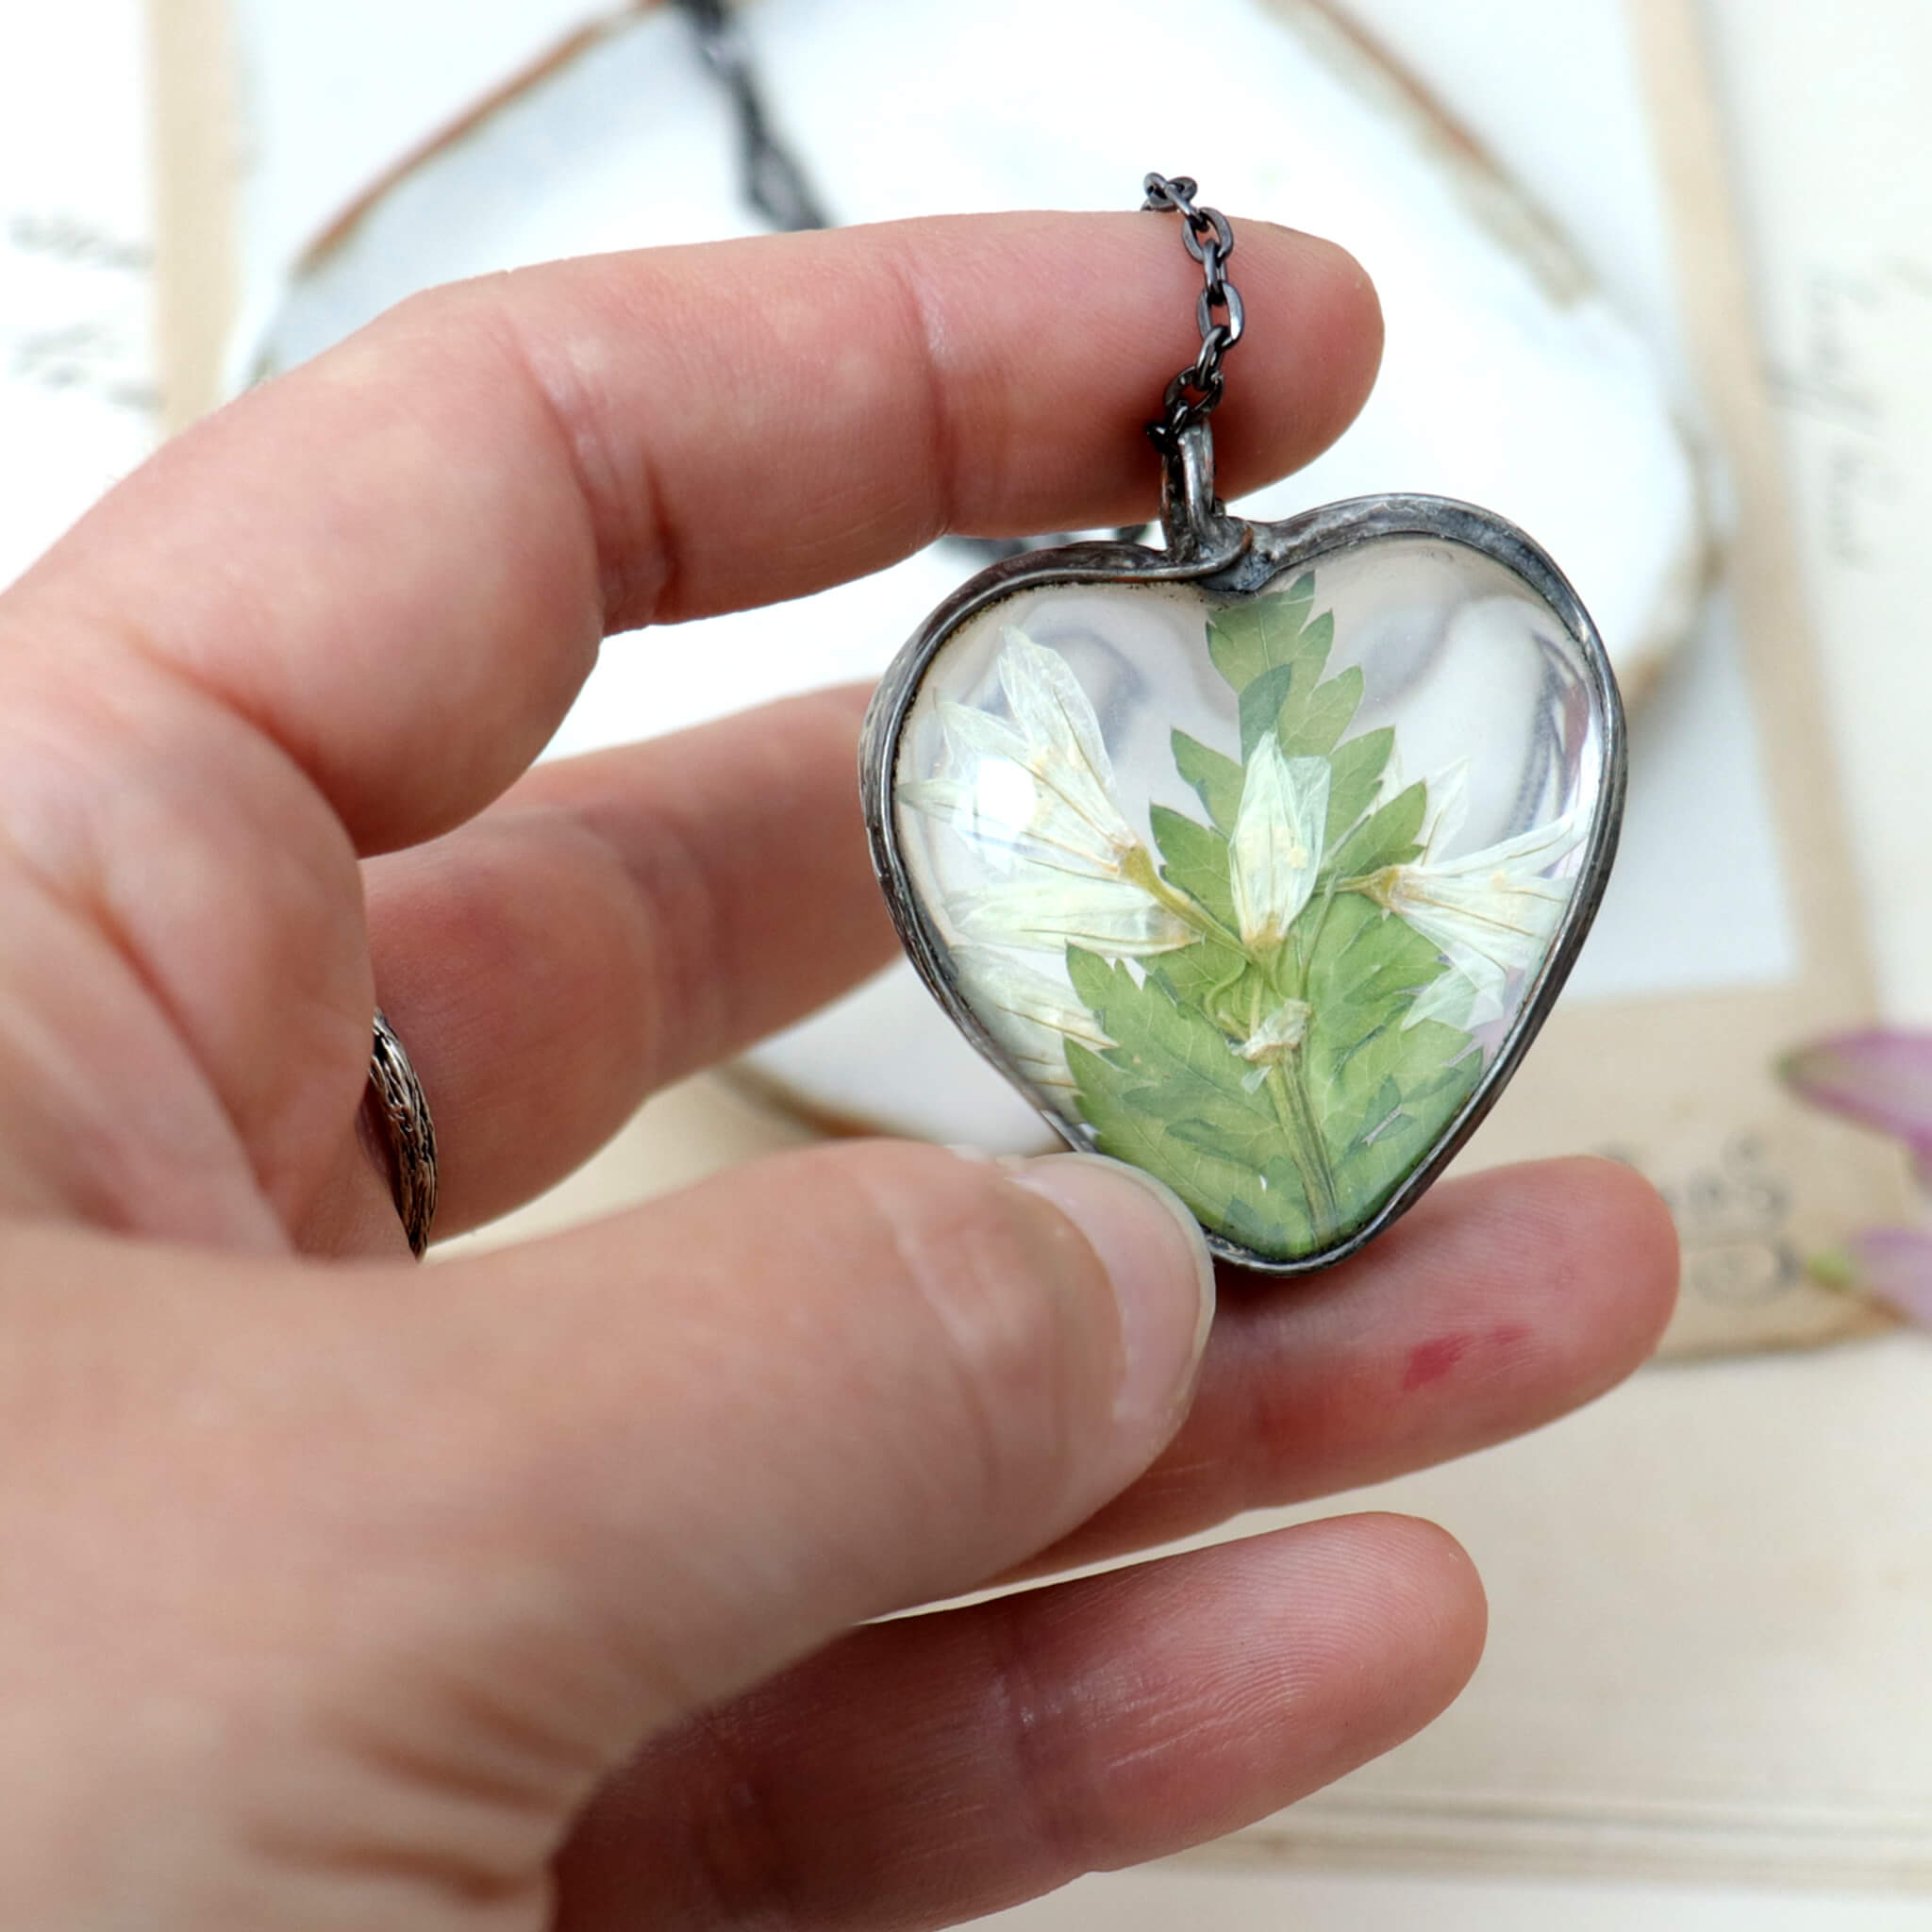 Hand holding heart shaped necklace with pressed flowers in focus blurry background